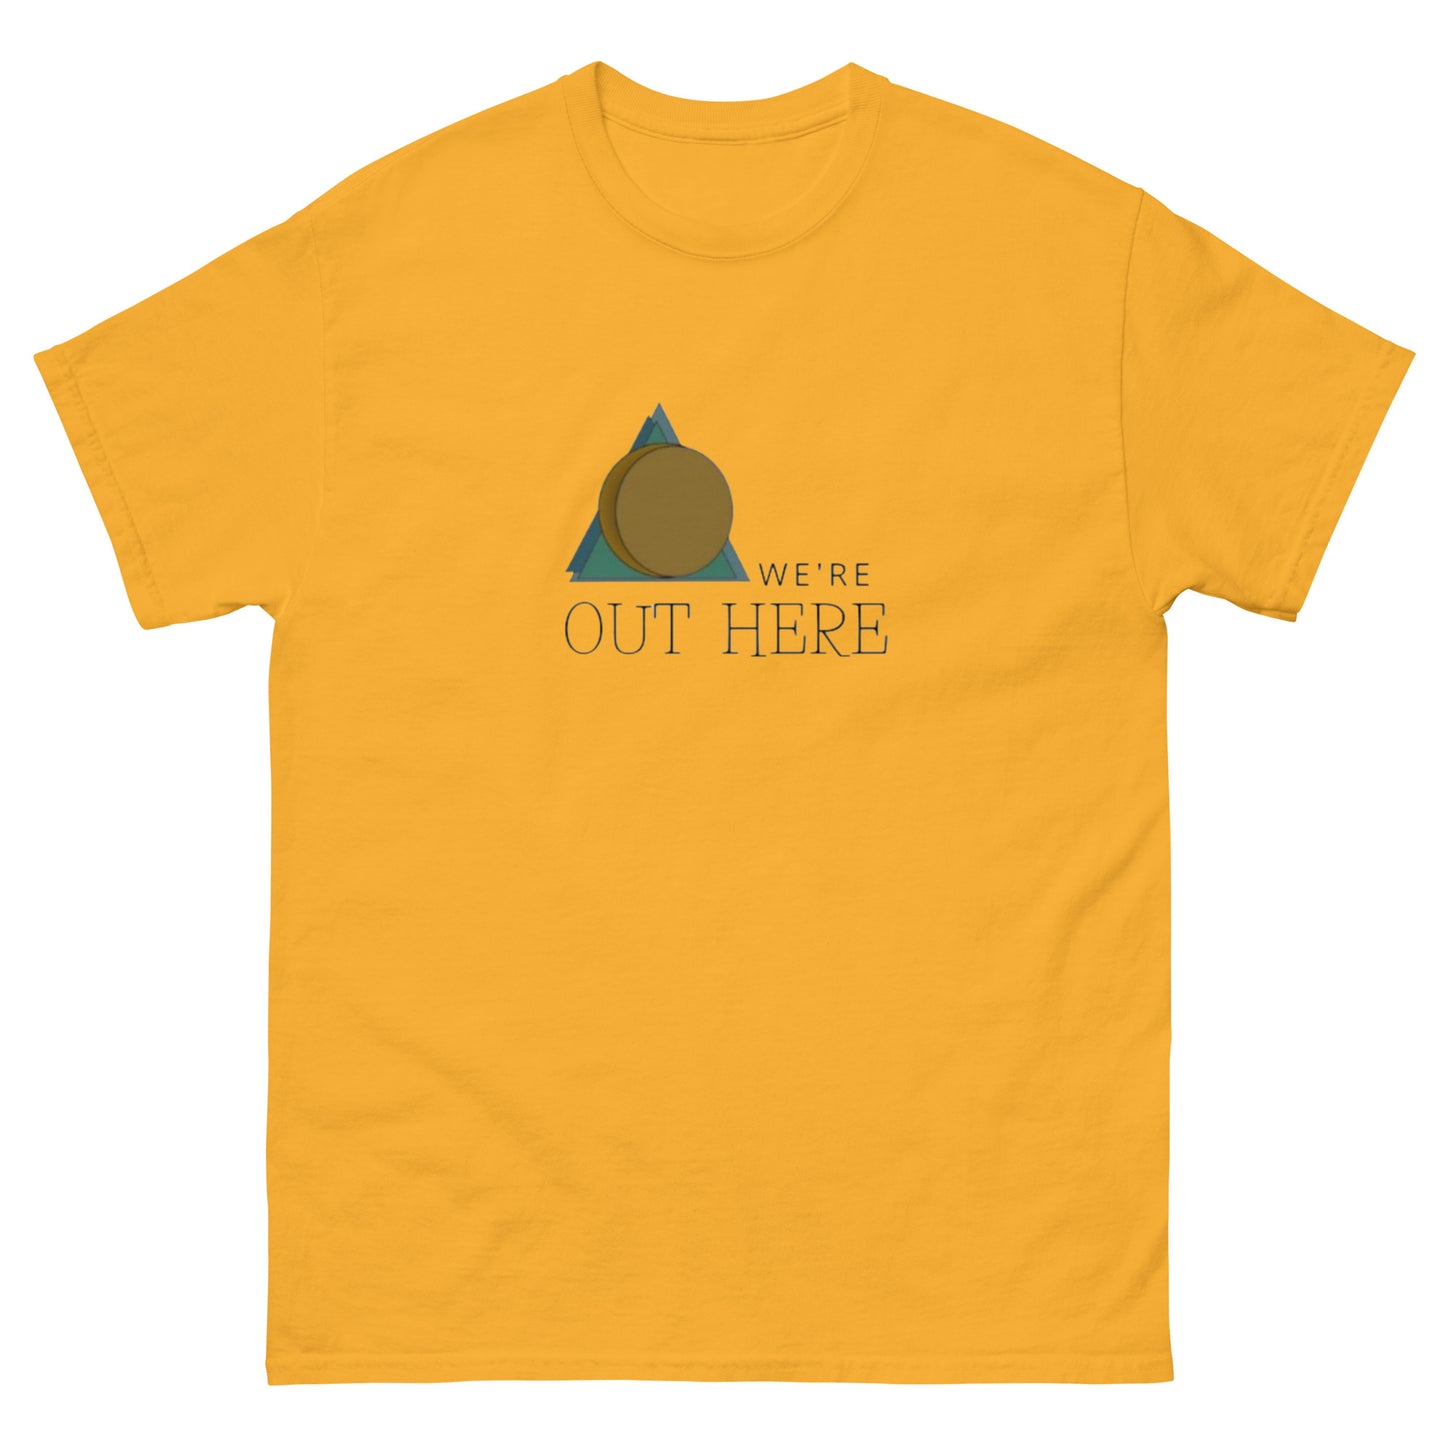 We're Out Here classic tee limited time colors